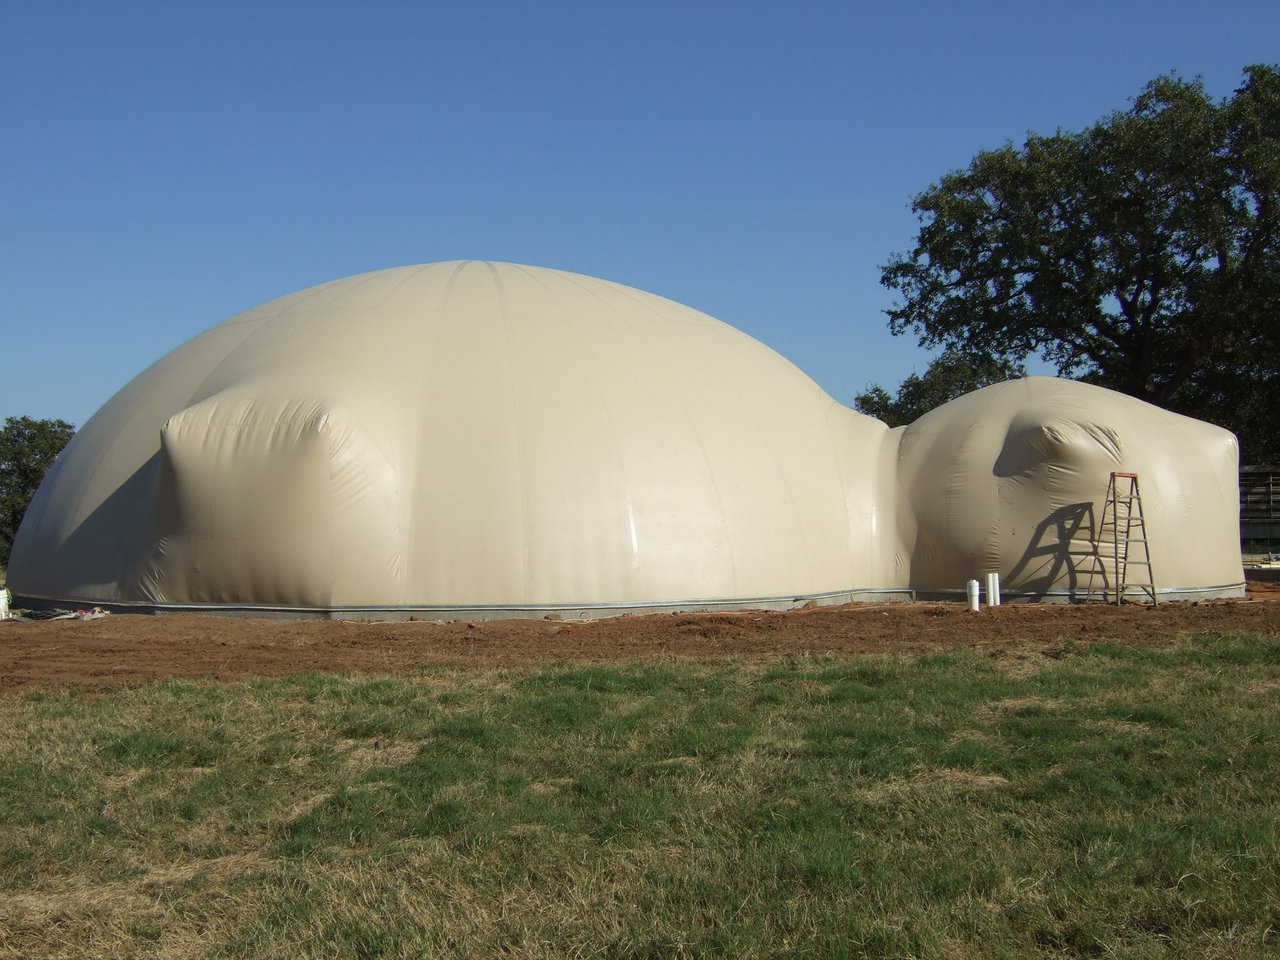 Done! — This properly inflated Airform will determine the size and shape of a Monolithic Dome.